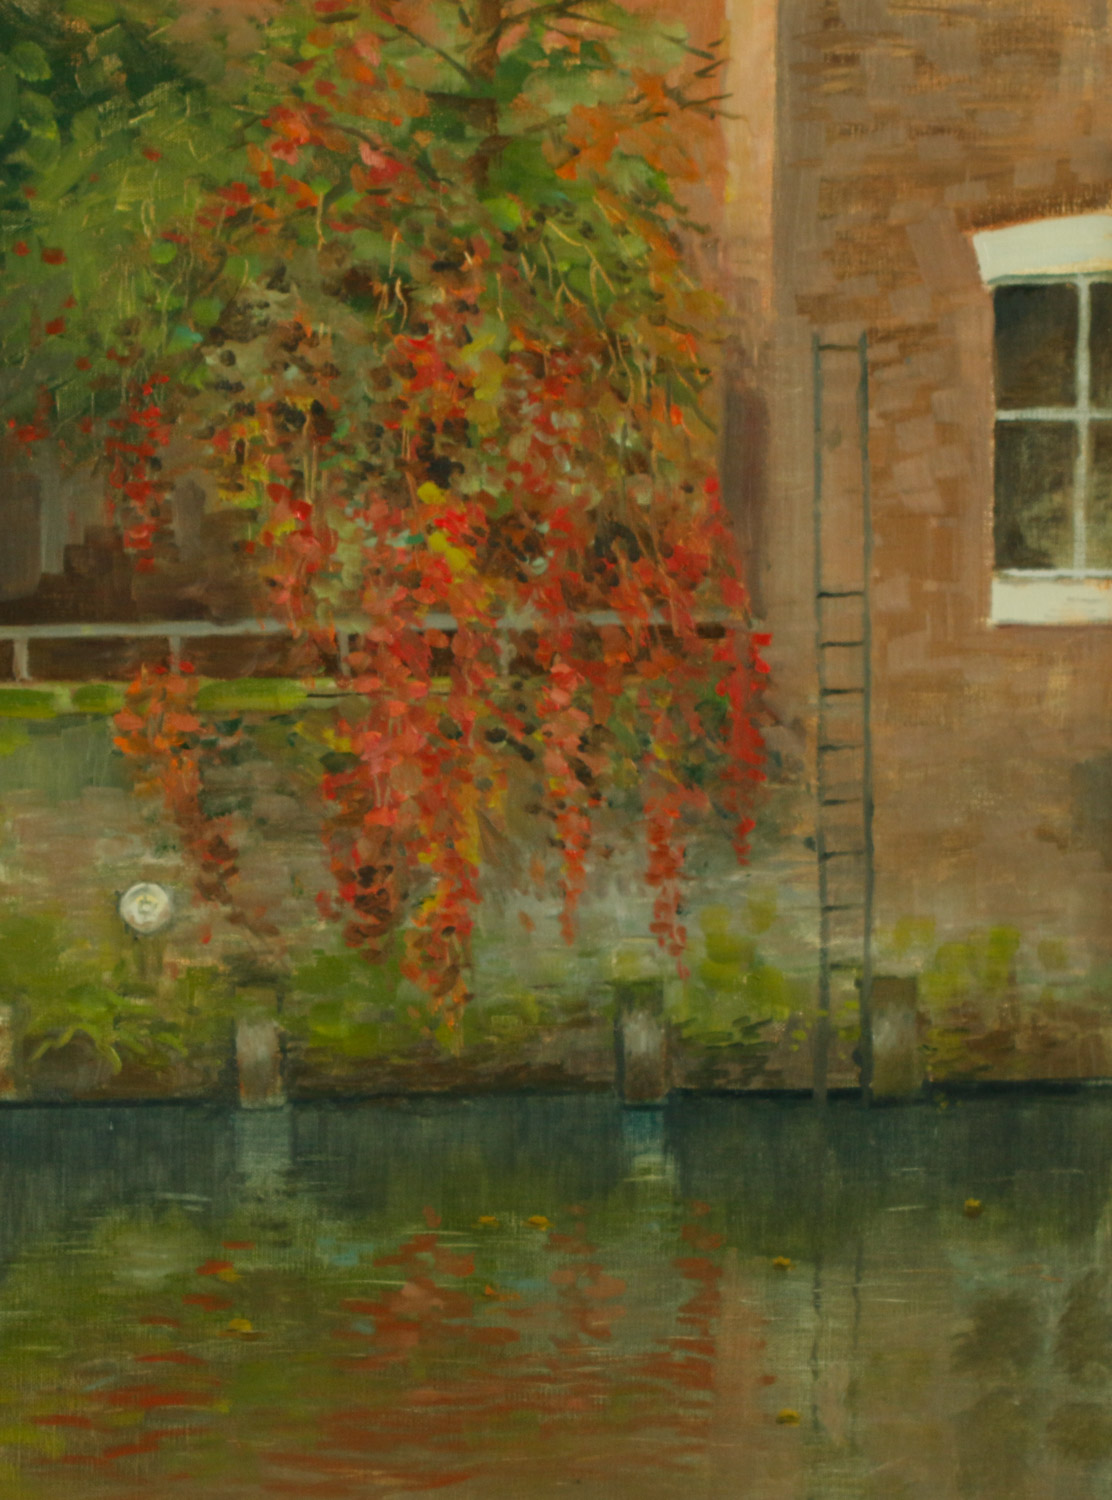 Artist-Jennifer-Sendall-Red-and-Green-on-the-River-Wensum-£485-12x16-Oil-on-Linen-at-Paint-Out-Norwich-2015-photo-by-Mark-Ivan-Benfield-6069-1